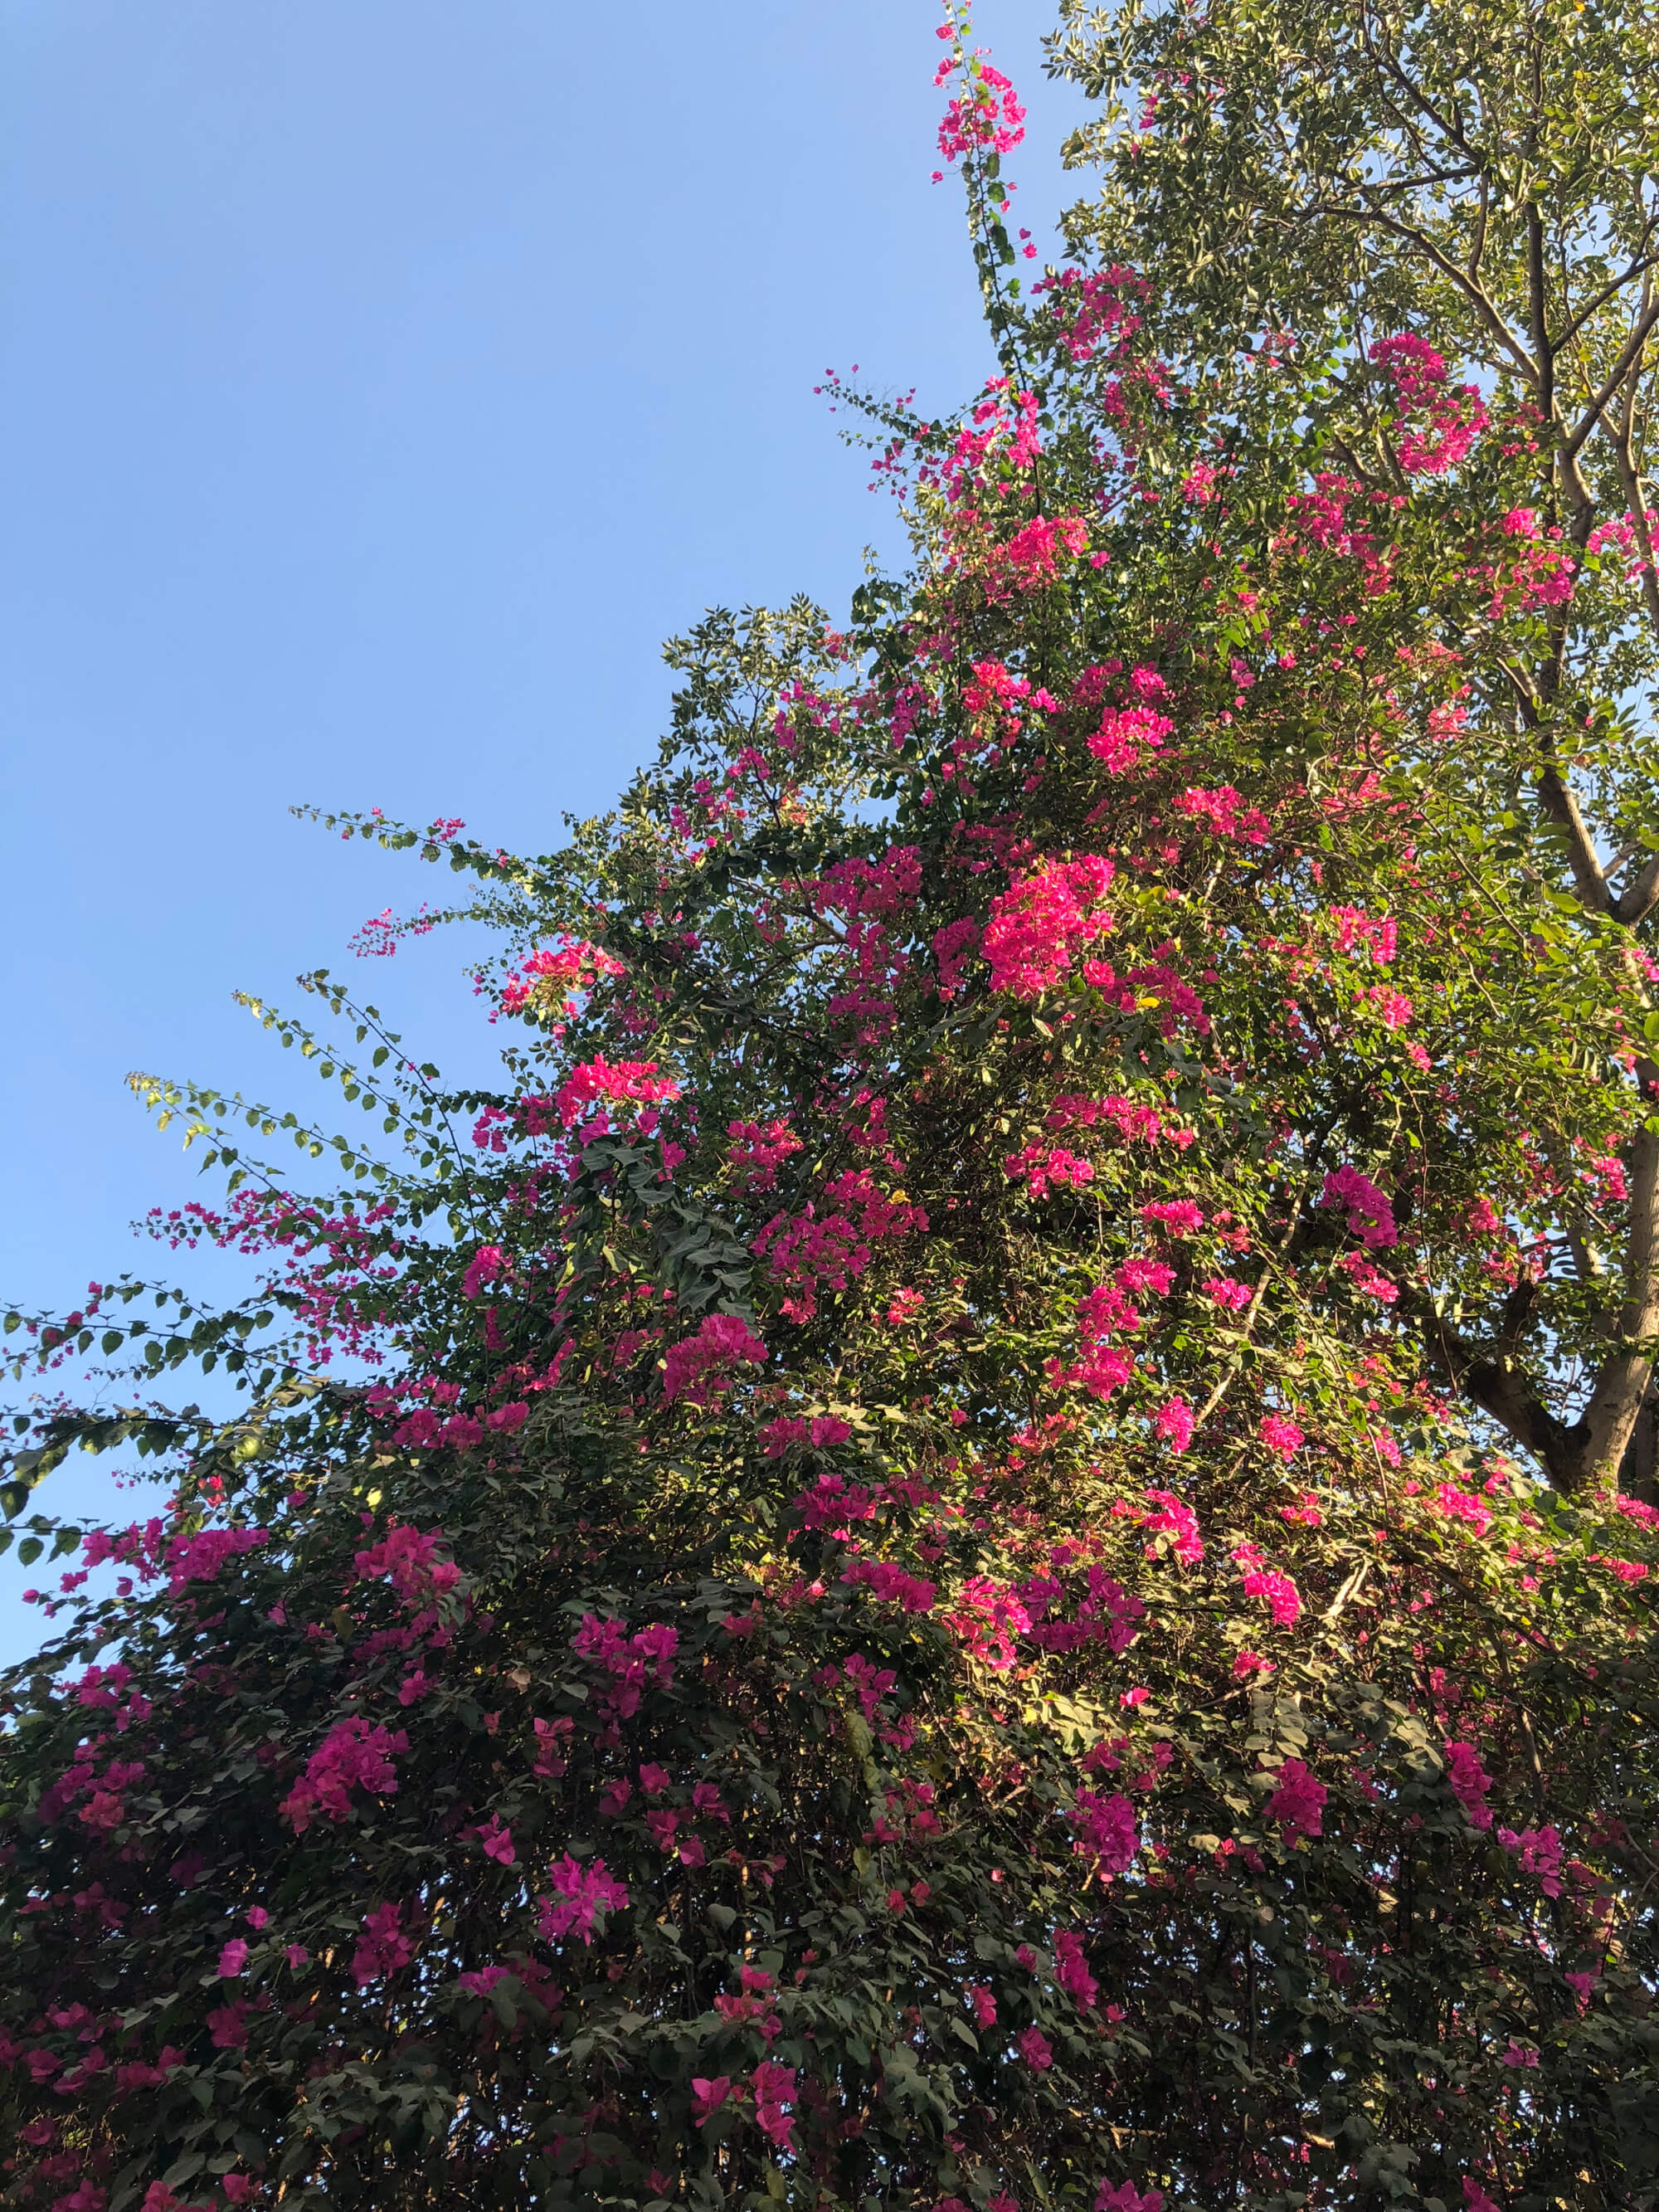 Shocking pink bougainvillea flowers commonly found in Indian streets